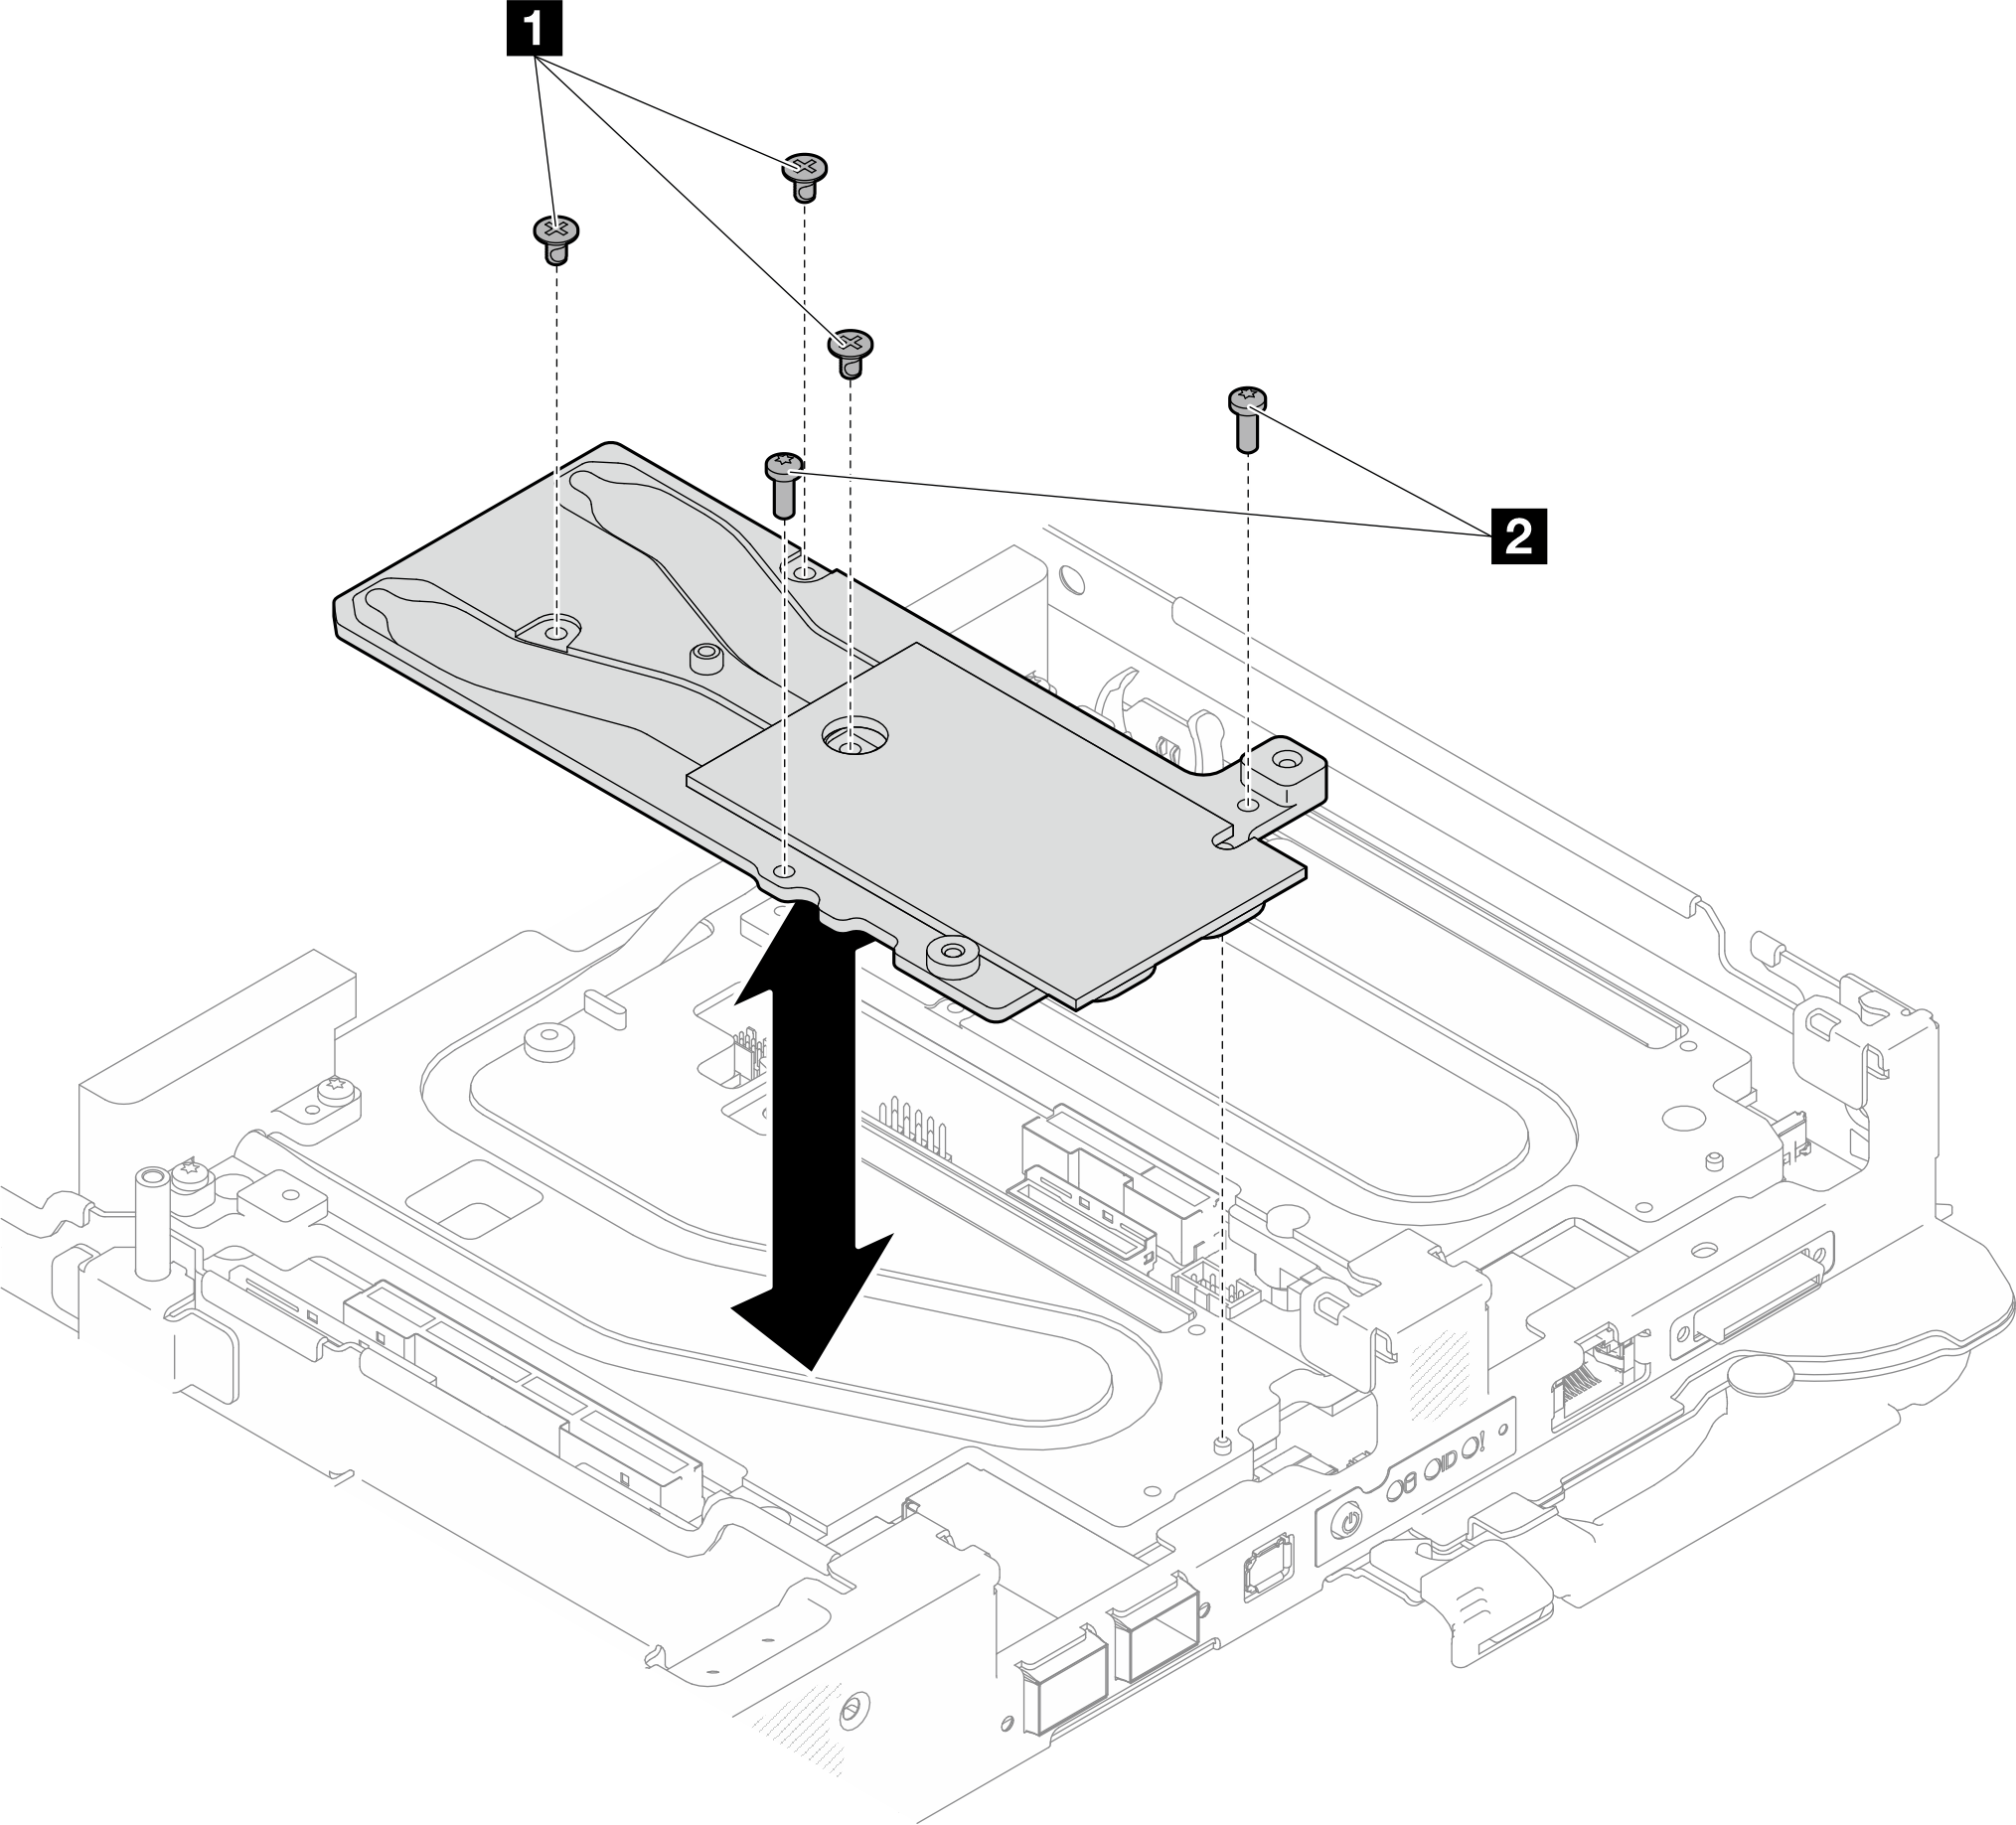 Removing the OSFP module conduction plate